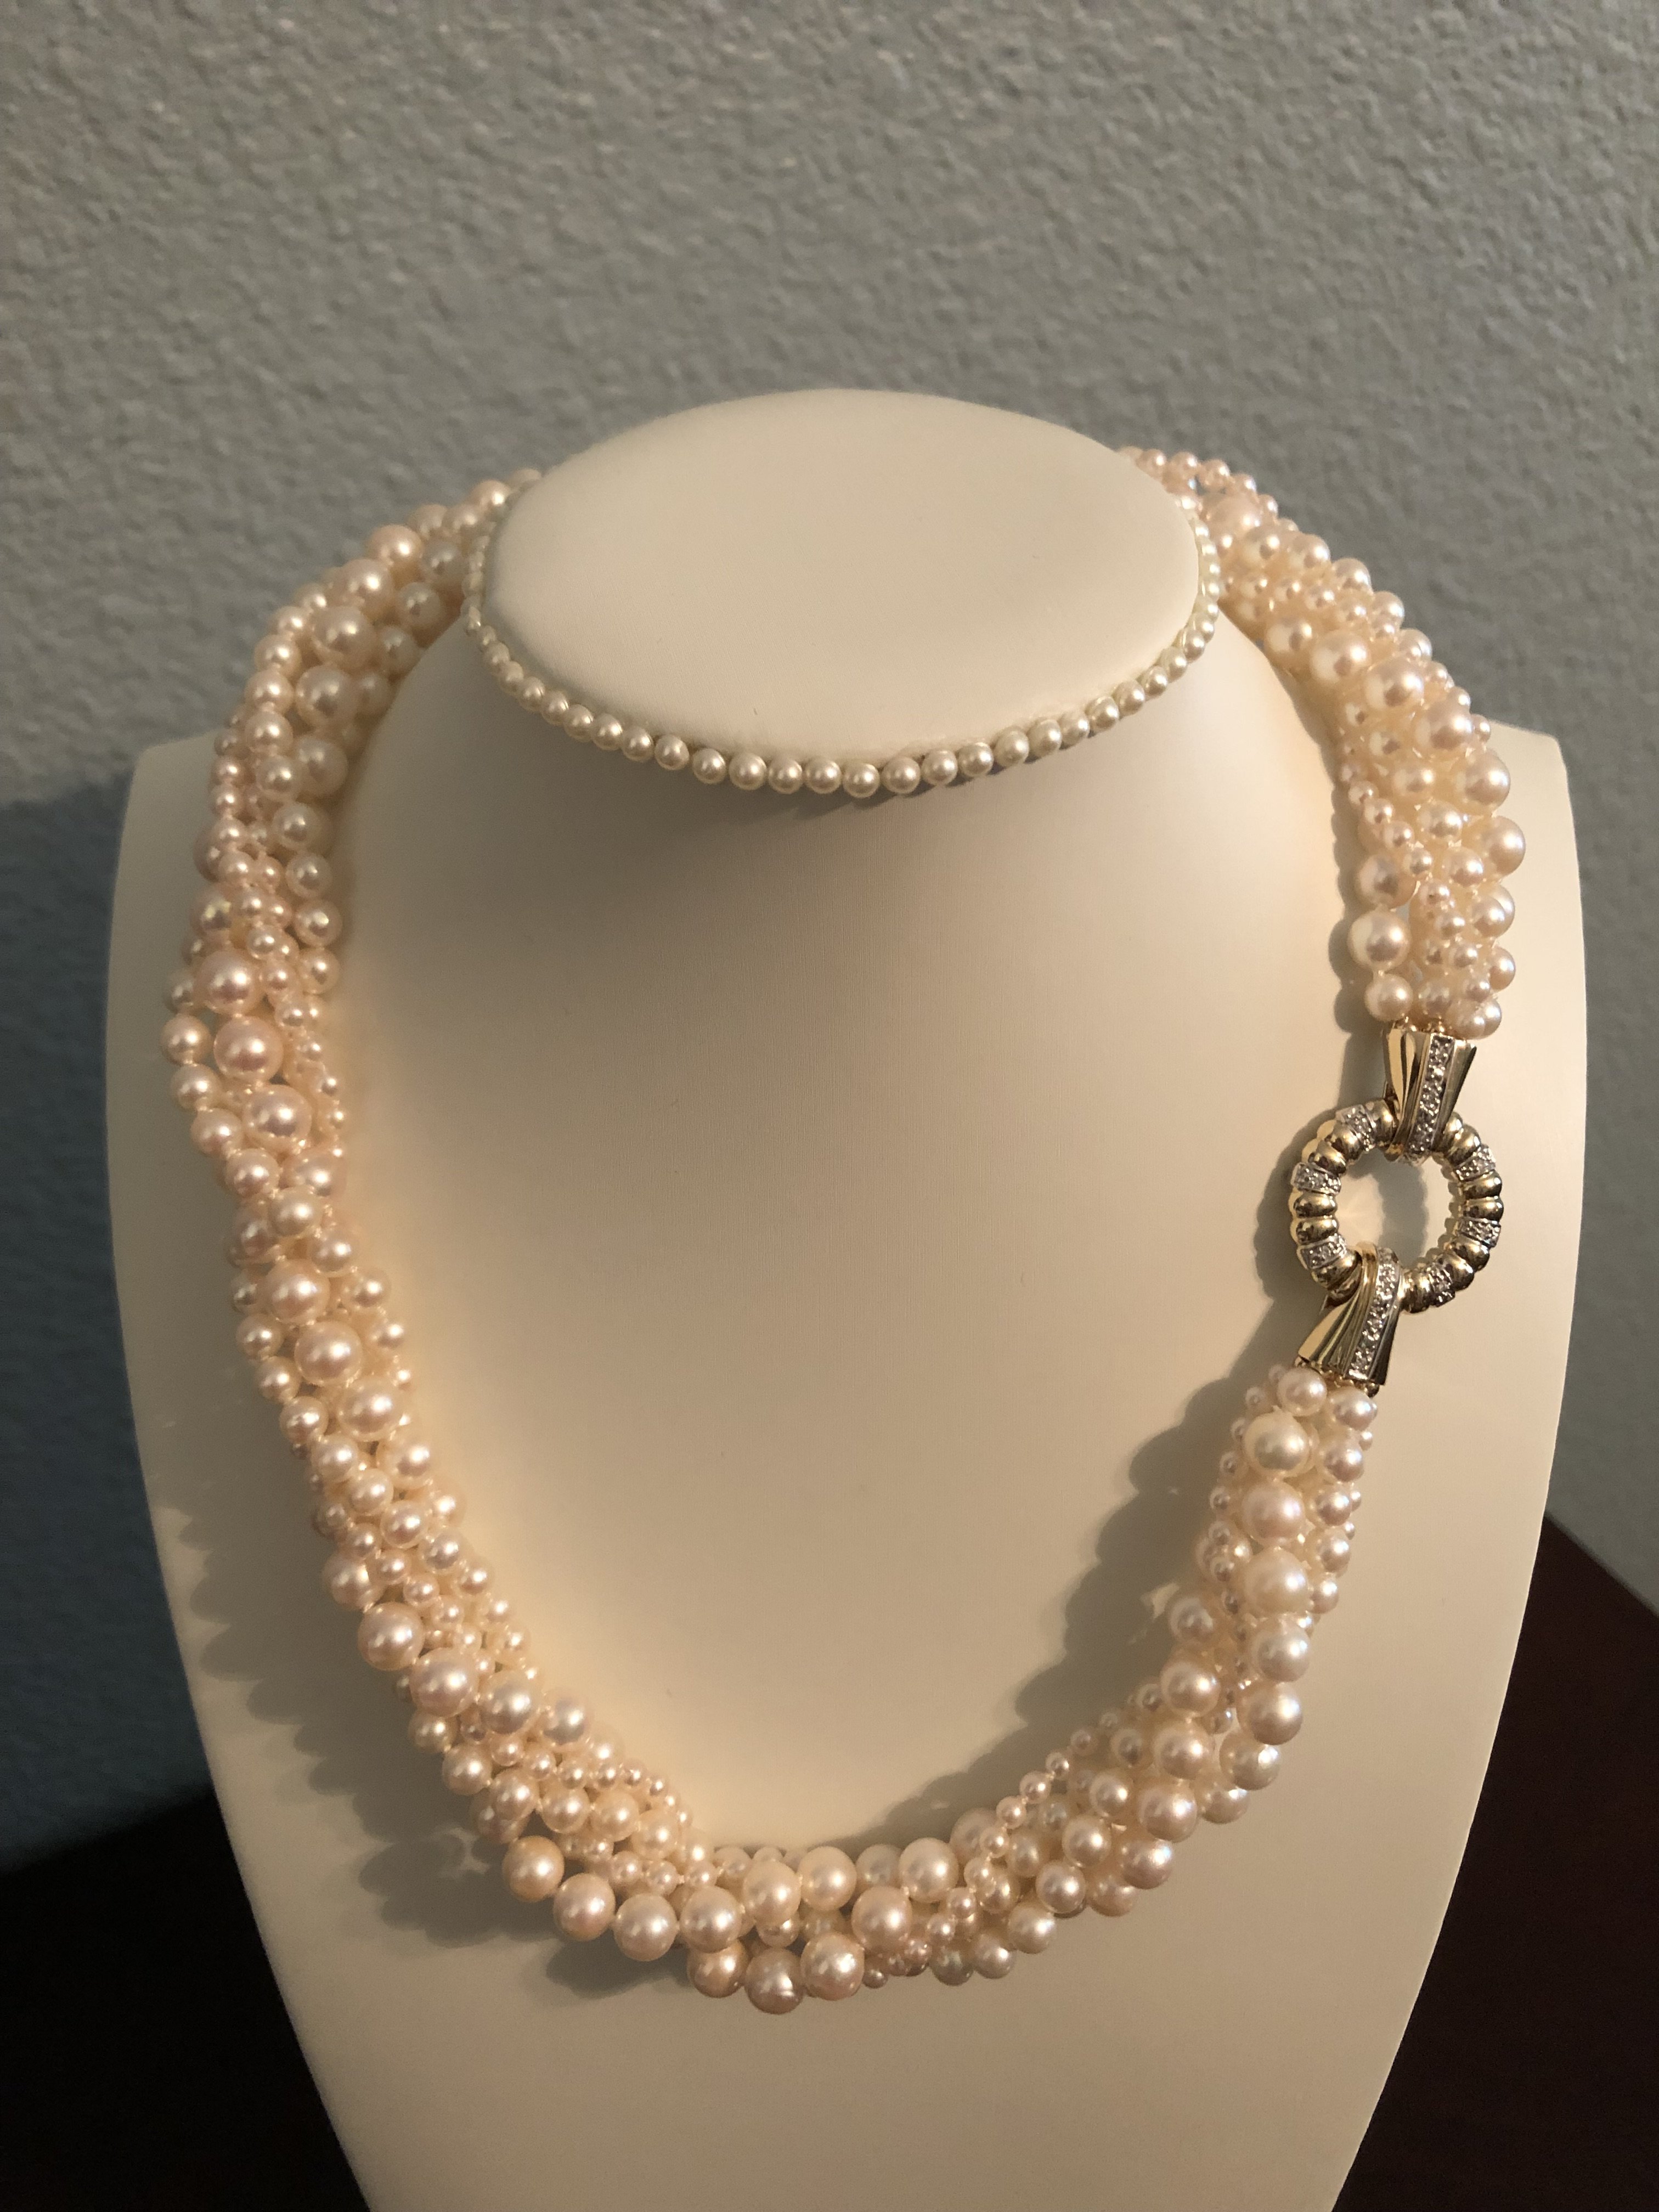 For this necklace, I worked hard to find varying sizes of Akoya pearls that would work well together. 2-3mm, 1-4.5mm, 1-5mm, 1-5.5mm, 1-6-6.5mm. I was so happy to find all of these different strands and have them match so well in color and quality. It was quite a search. The true challenge was getting the lengths to work. The necklace is 18 long twisted (19 untwisted) and the clasp is 14K Yellow/White Gold with tiny diamonds.